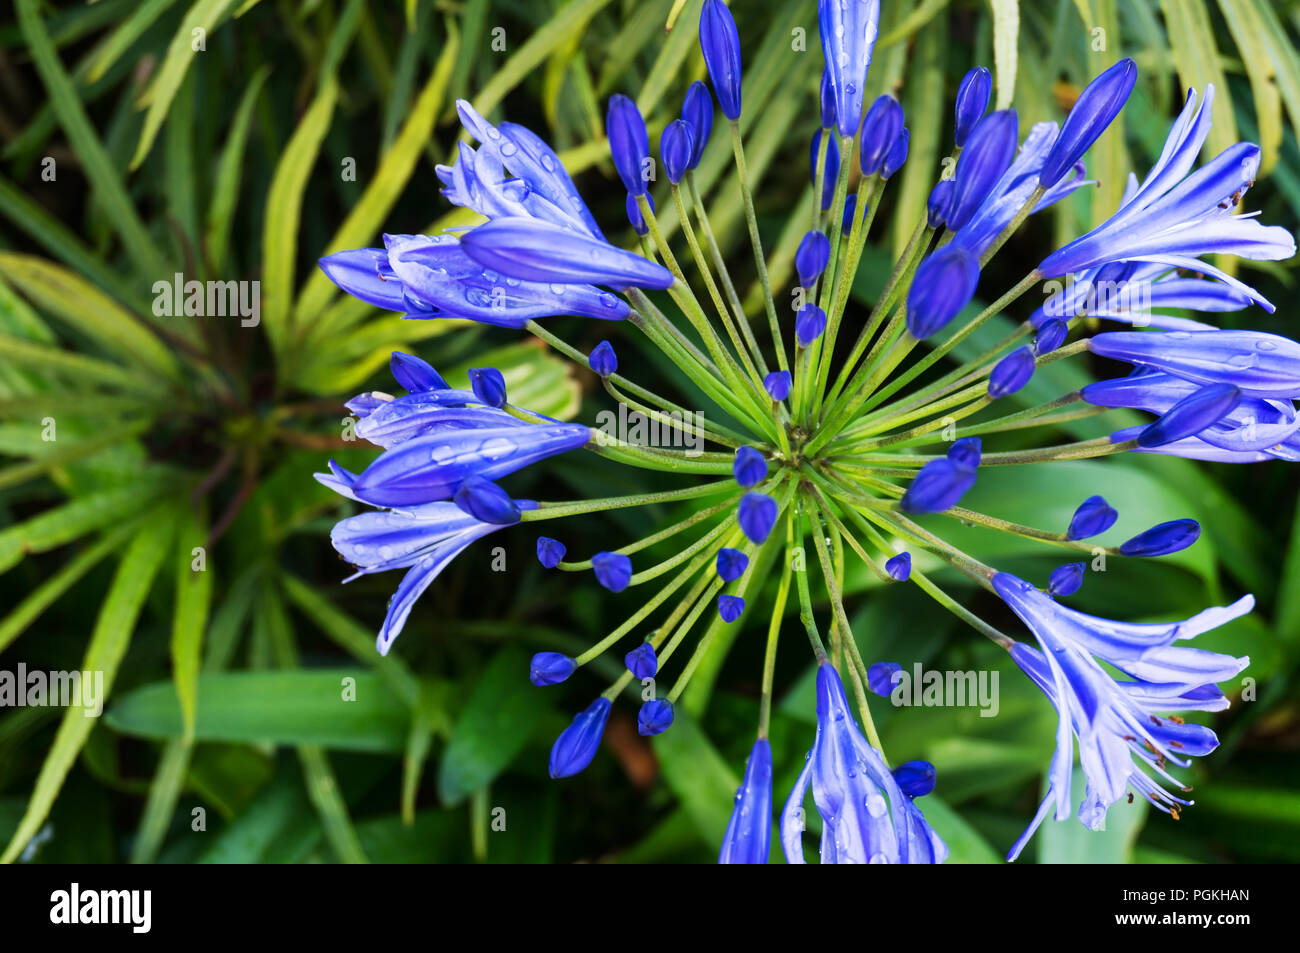 Triteleia laxa is a triplet lily known by several common names, including Ithuriel's spear, common triteleia and grassnut. Stock Photo